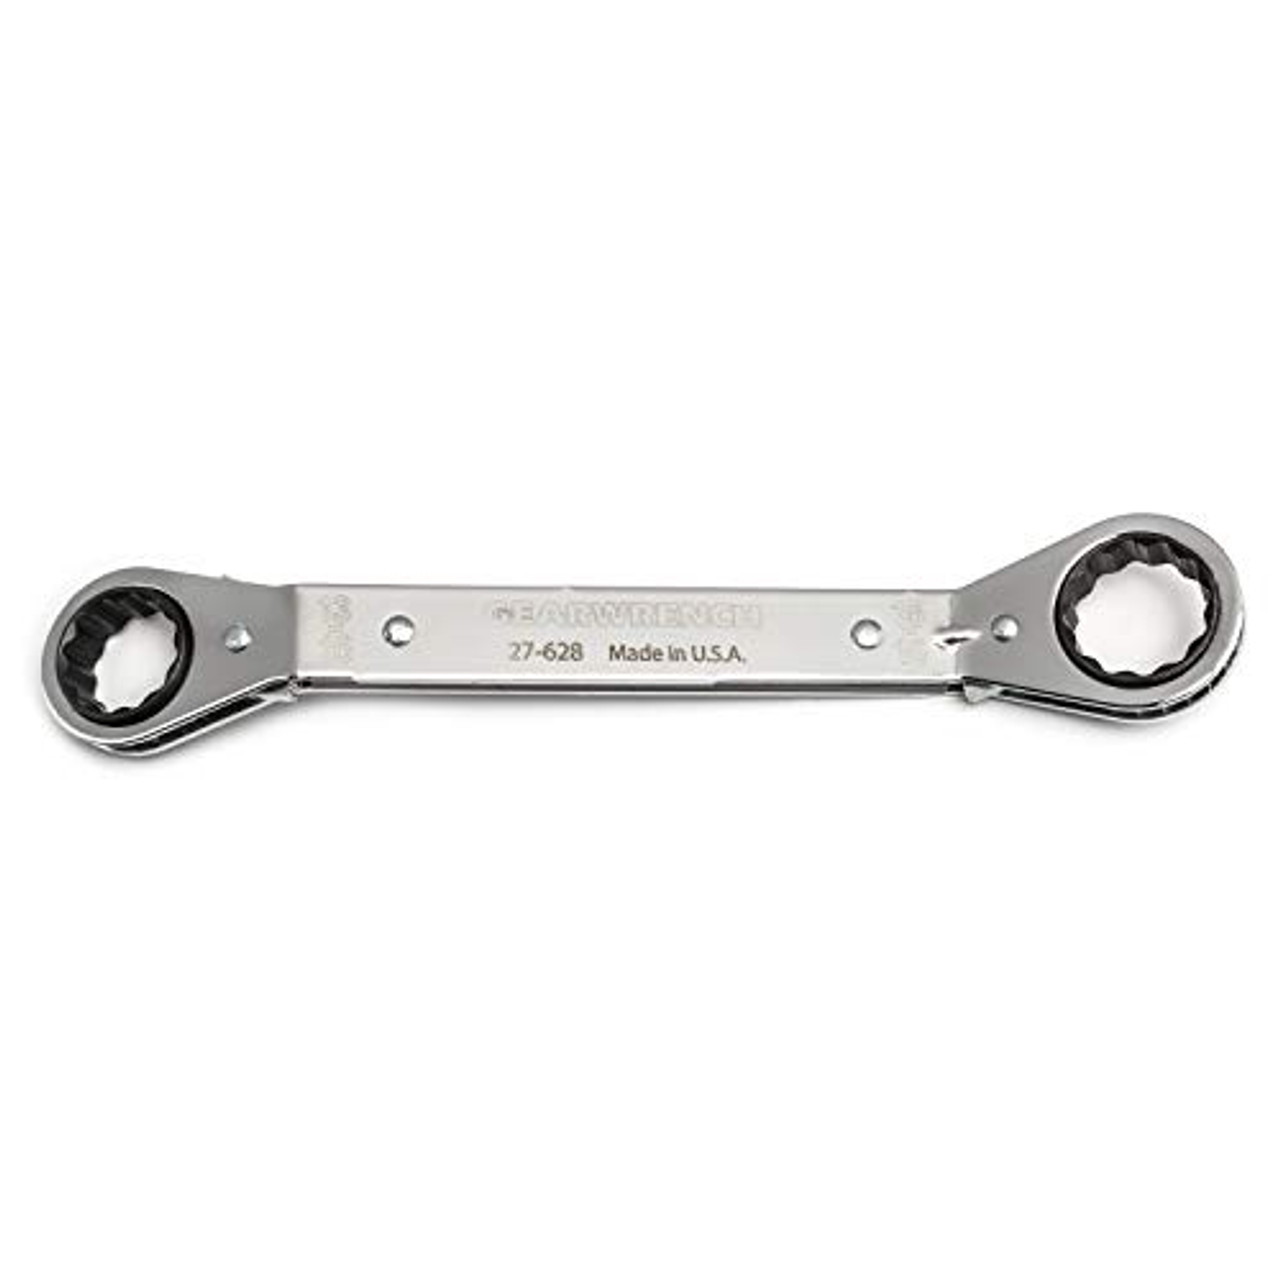 GEARWRENCH Offset Laminated Ratcheting Box Wrench 25°, 13/16" x 15/16", 12 Point - 27-628G